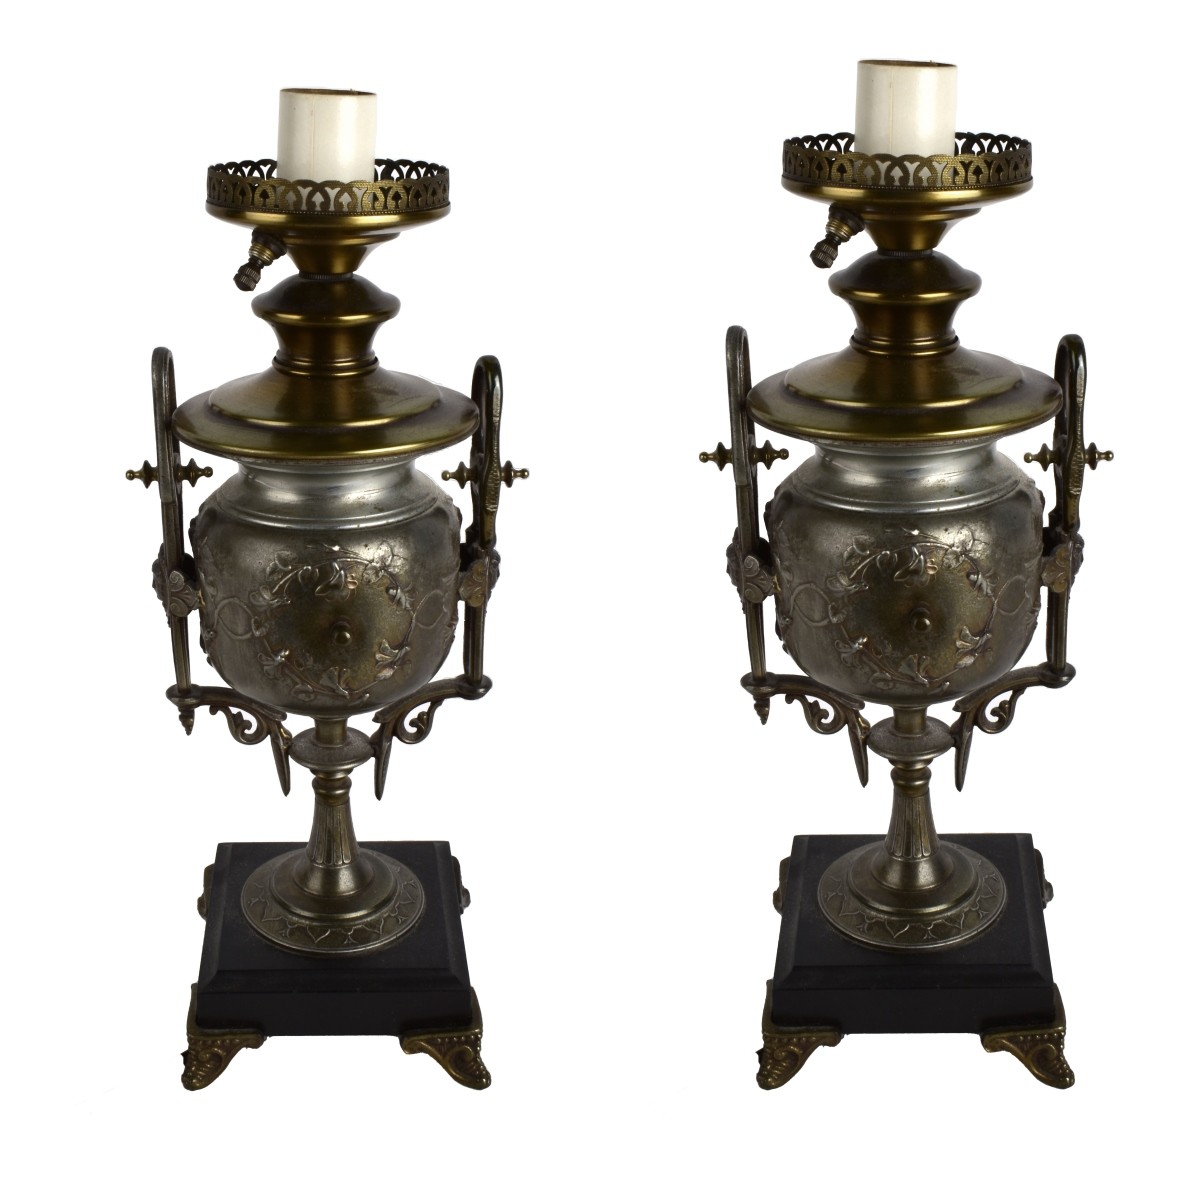 Pair of Antique Neoclassical Style Lamps